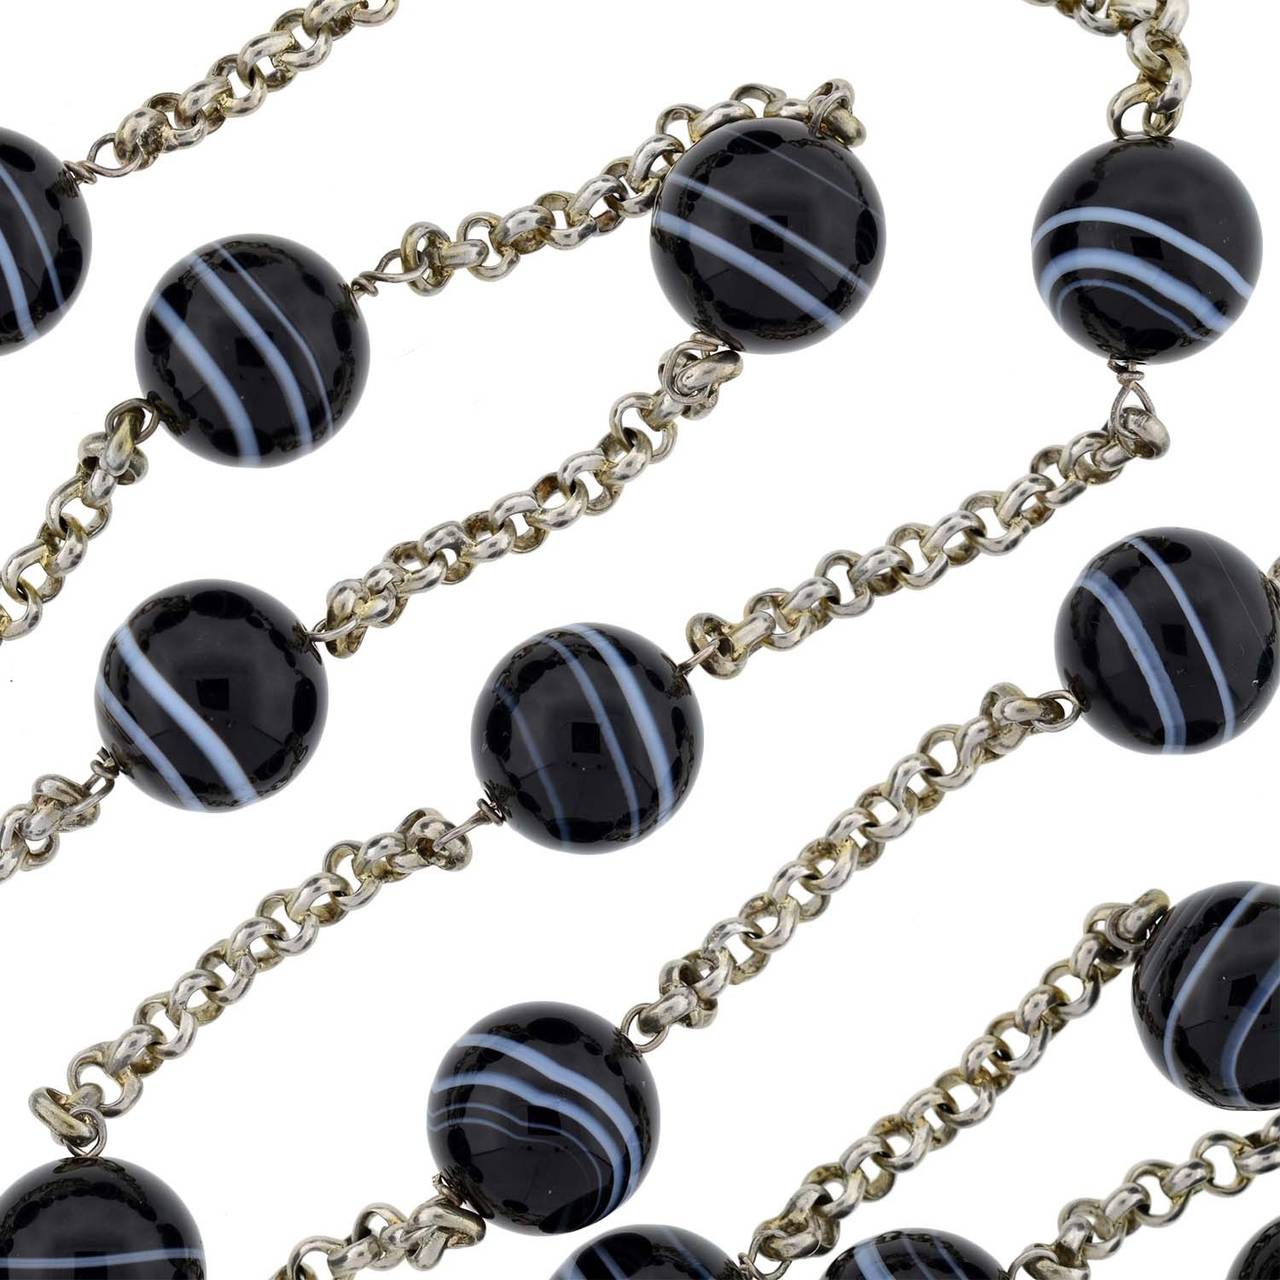 A bold Estate sterling and agate chain necklace! Extremely long in length, this fabulous piece is comprised of sections of sterling silver chain that alternate with large banded agate beads. The chain has a simple round link and attaches to each